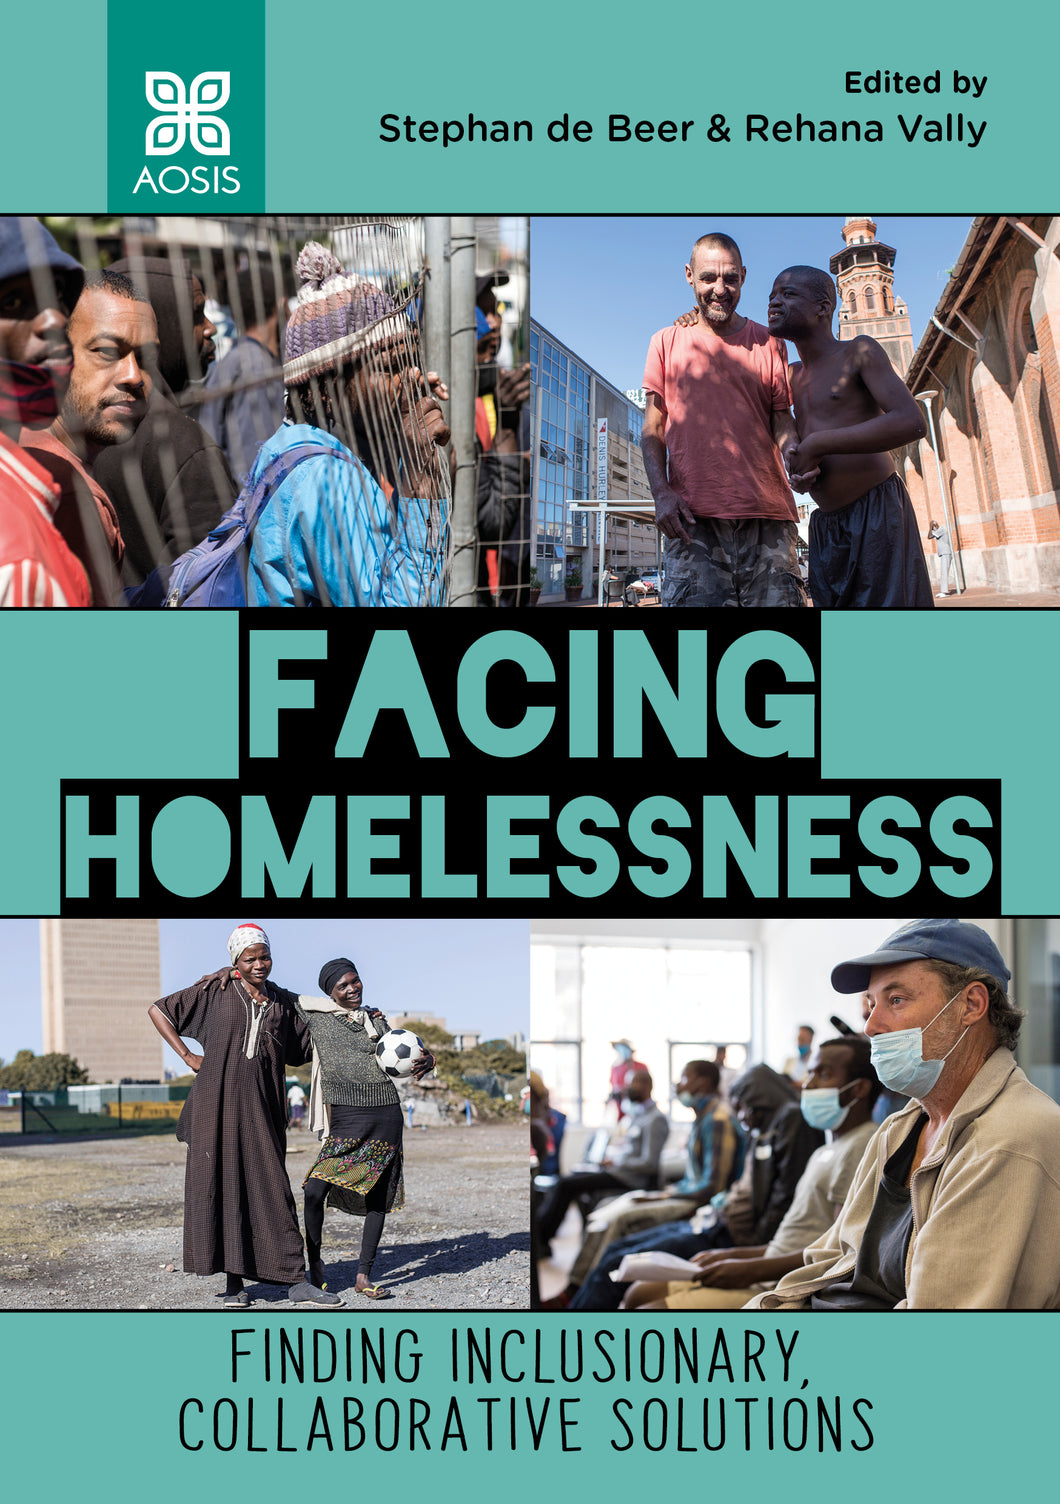 Facing homelessness: Finding inclusionary, collaborative solutions (Print copy)